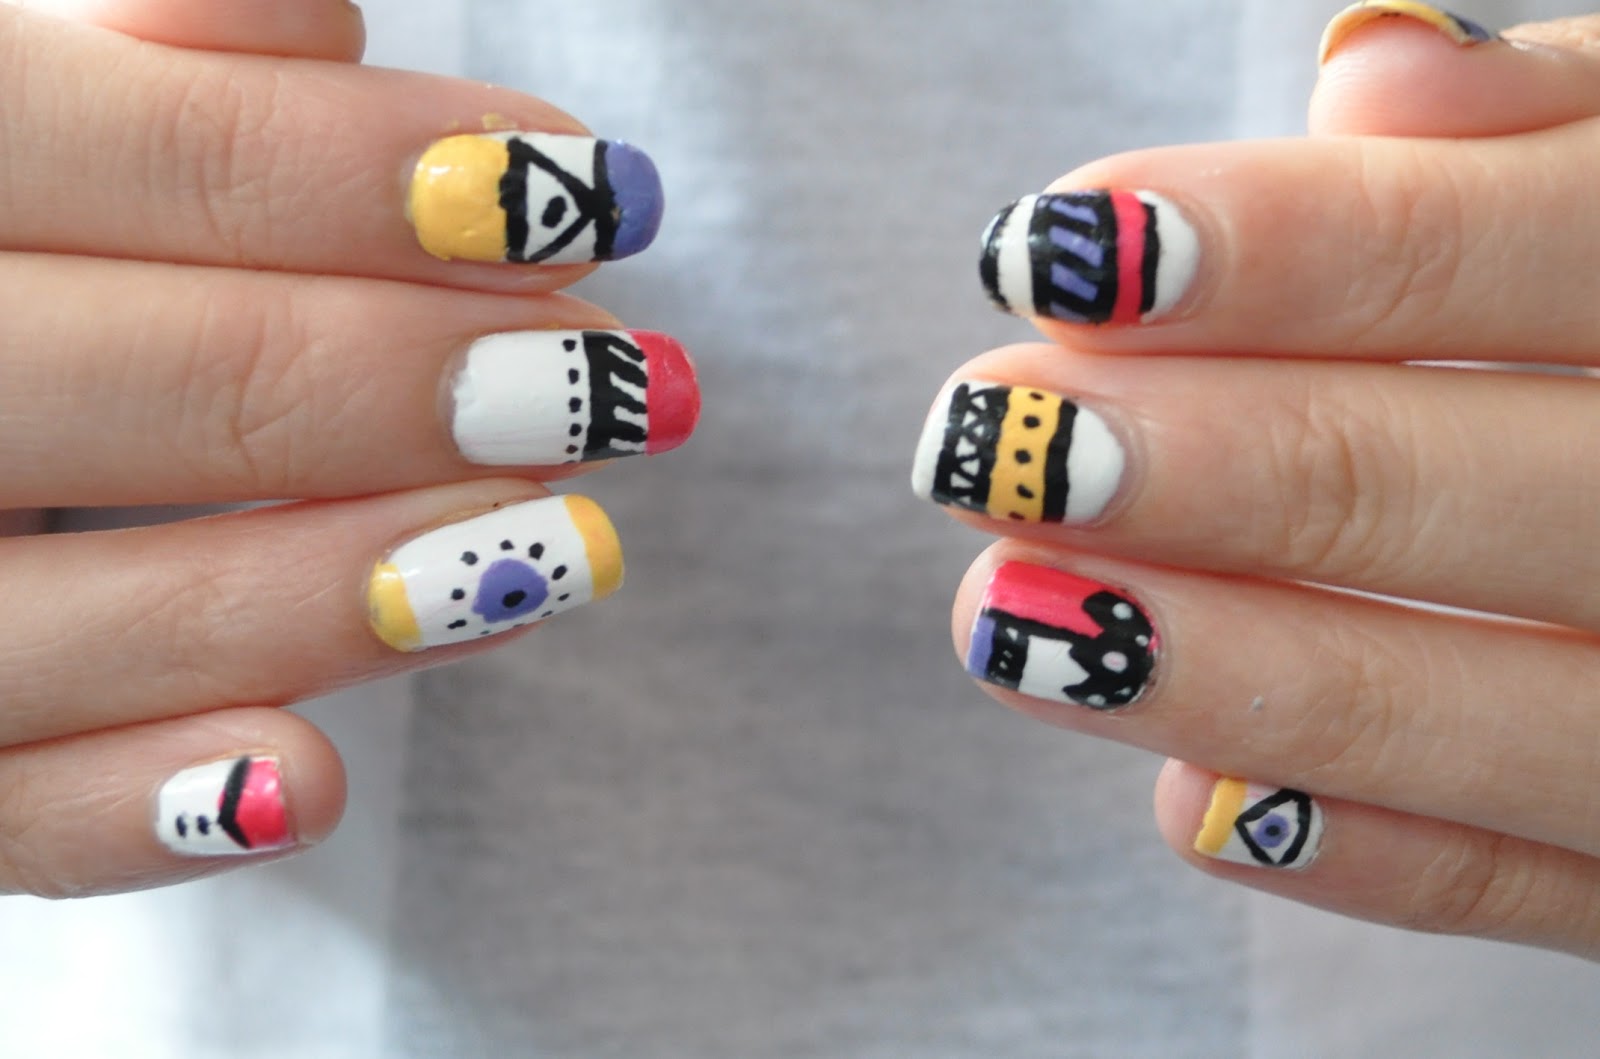 9. 15 Stunning Aztec Nail Art Designs to Try - wide 9